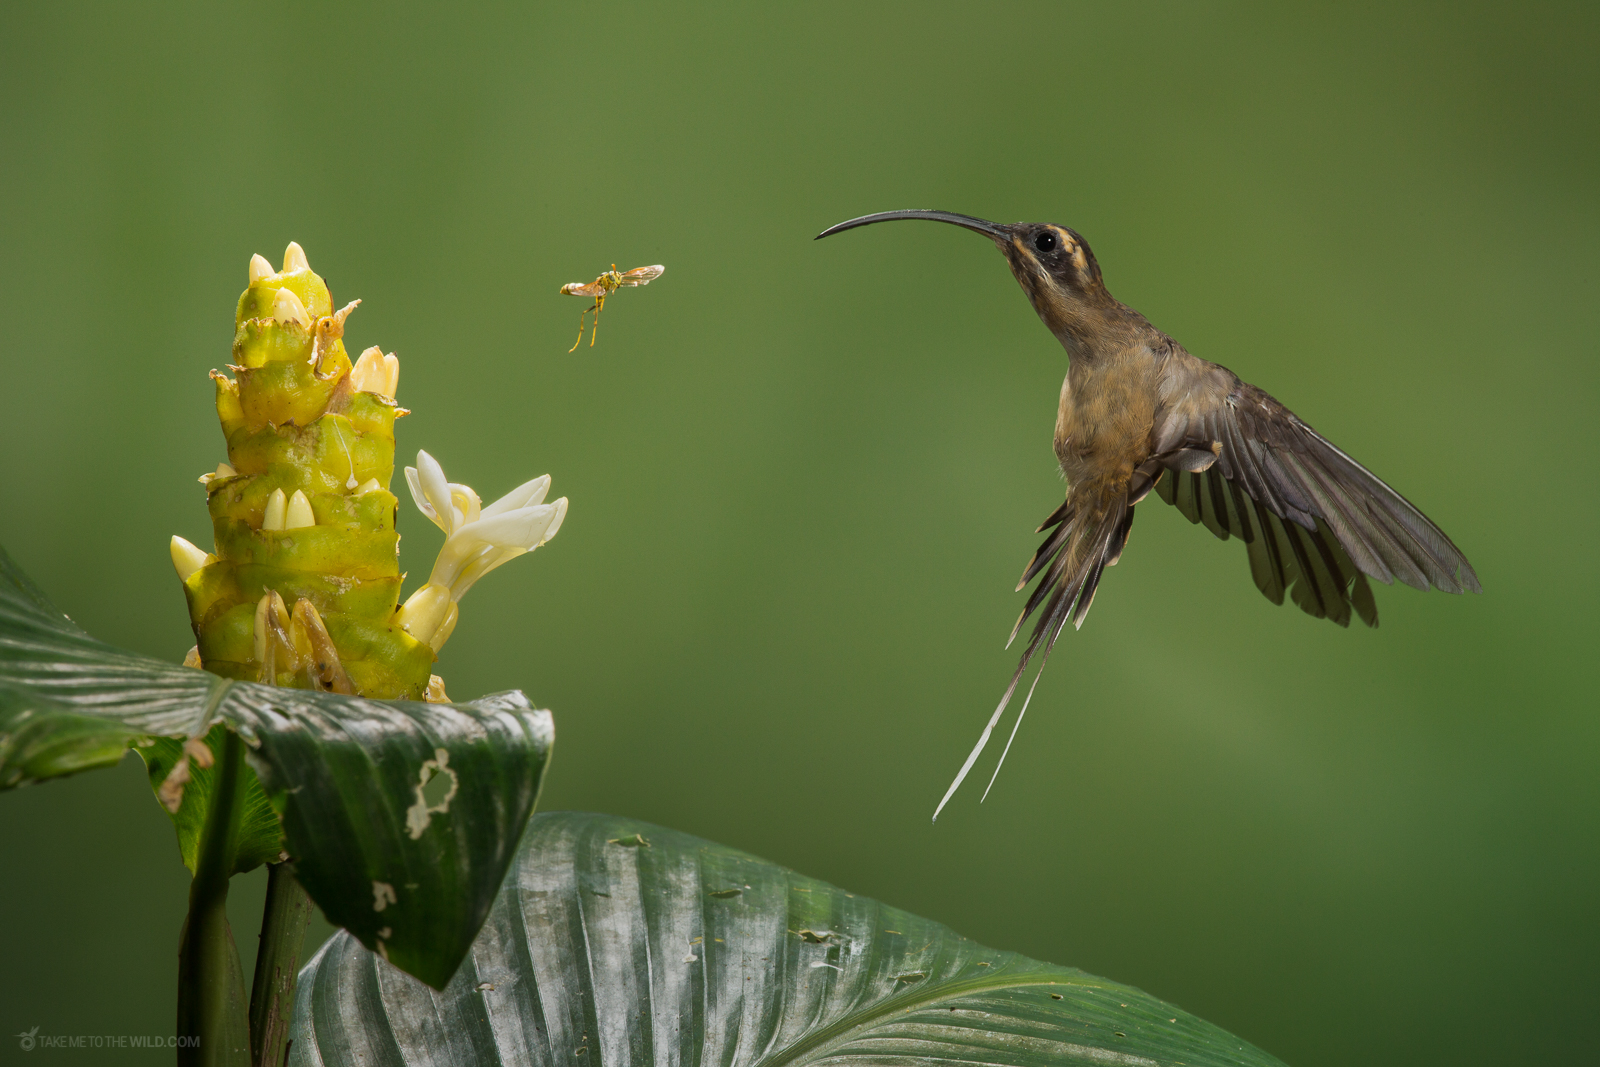 Long-billed Hermit (Phaethornis longirostris) fighting a bee at the lowlands of Costa Rica